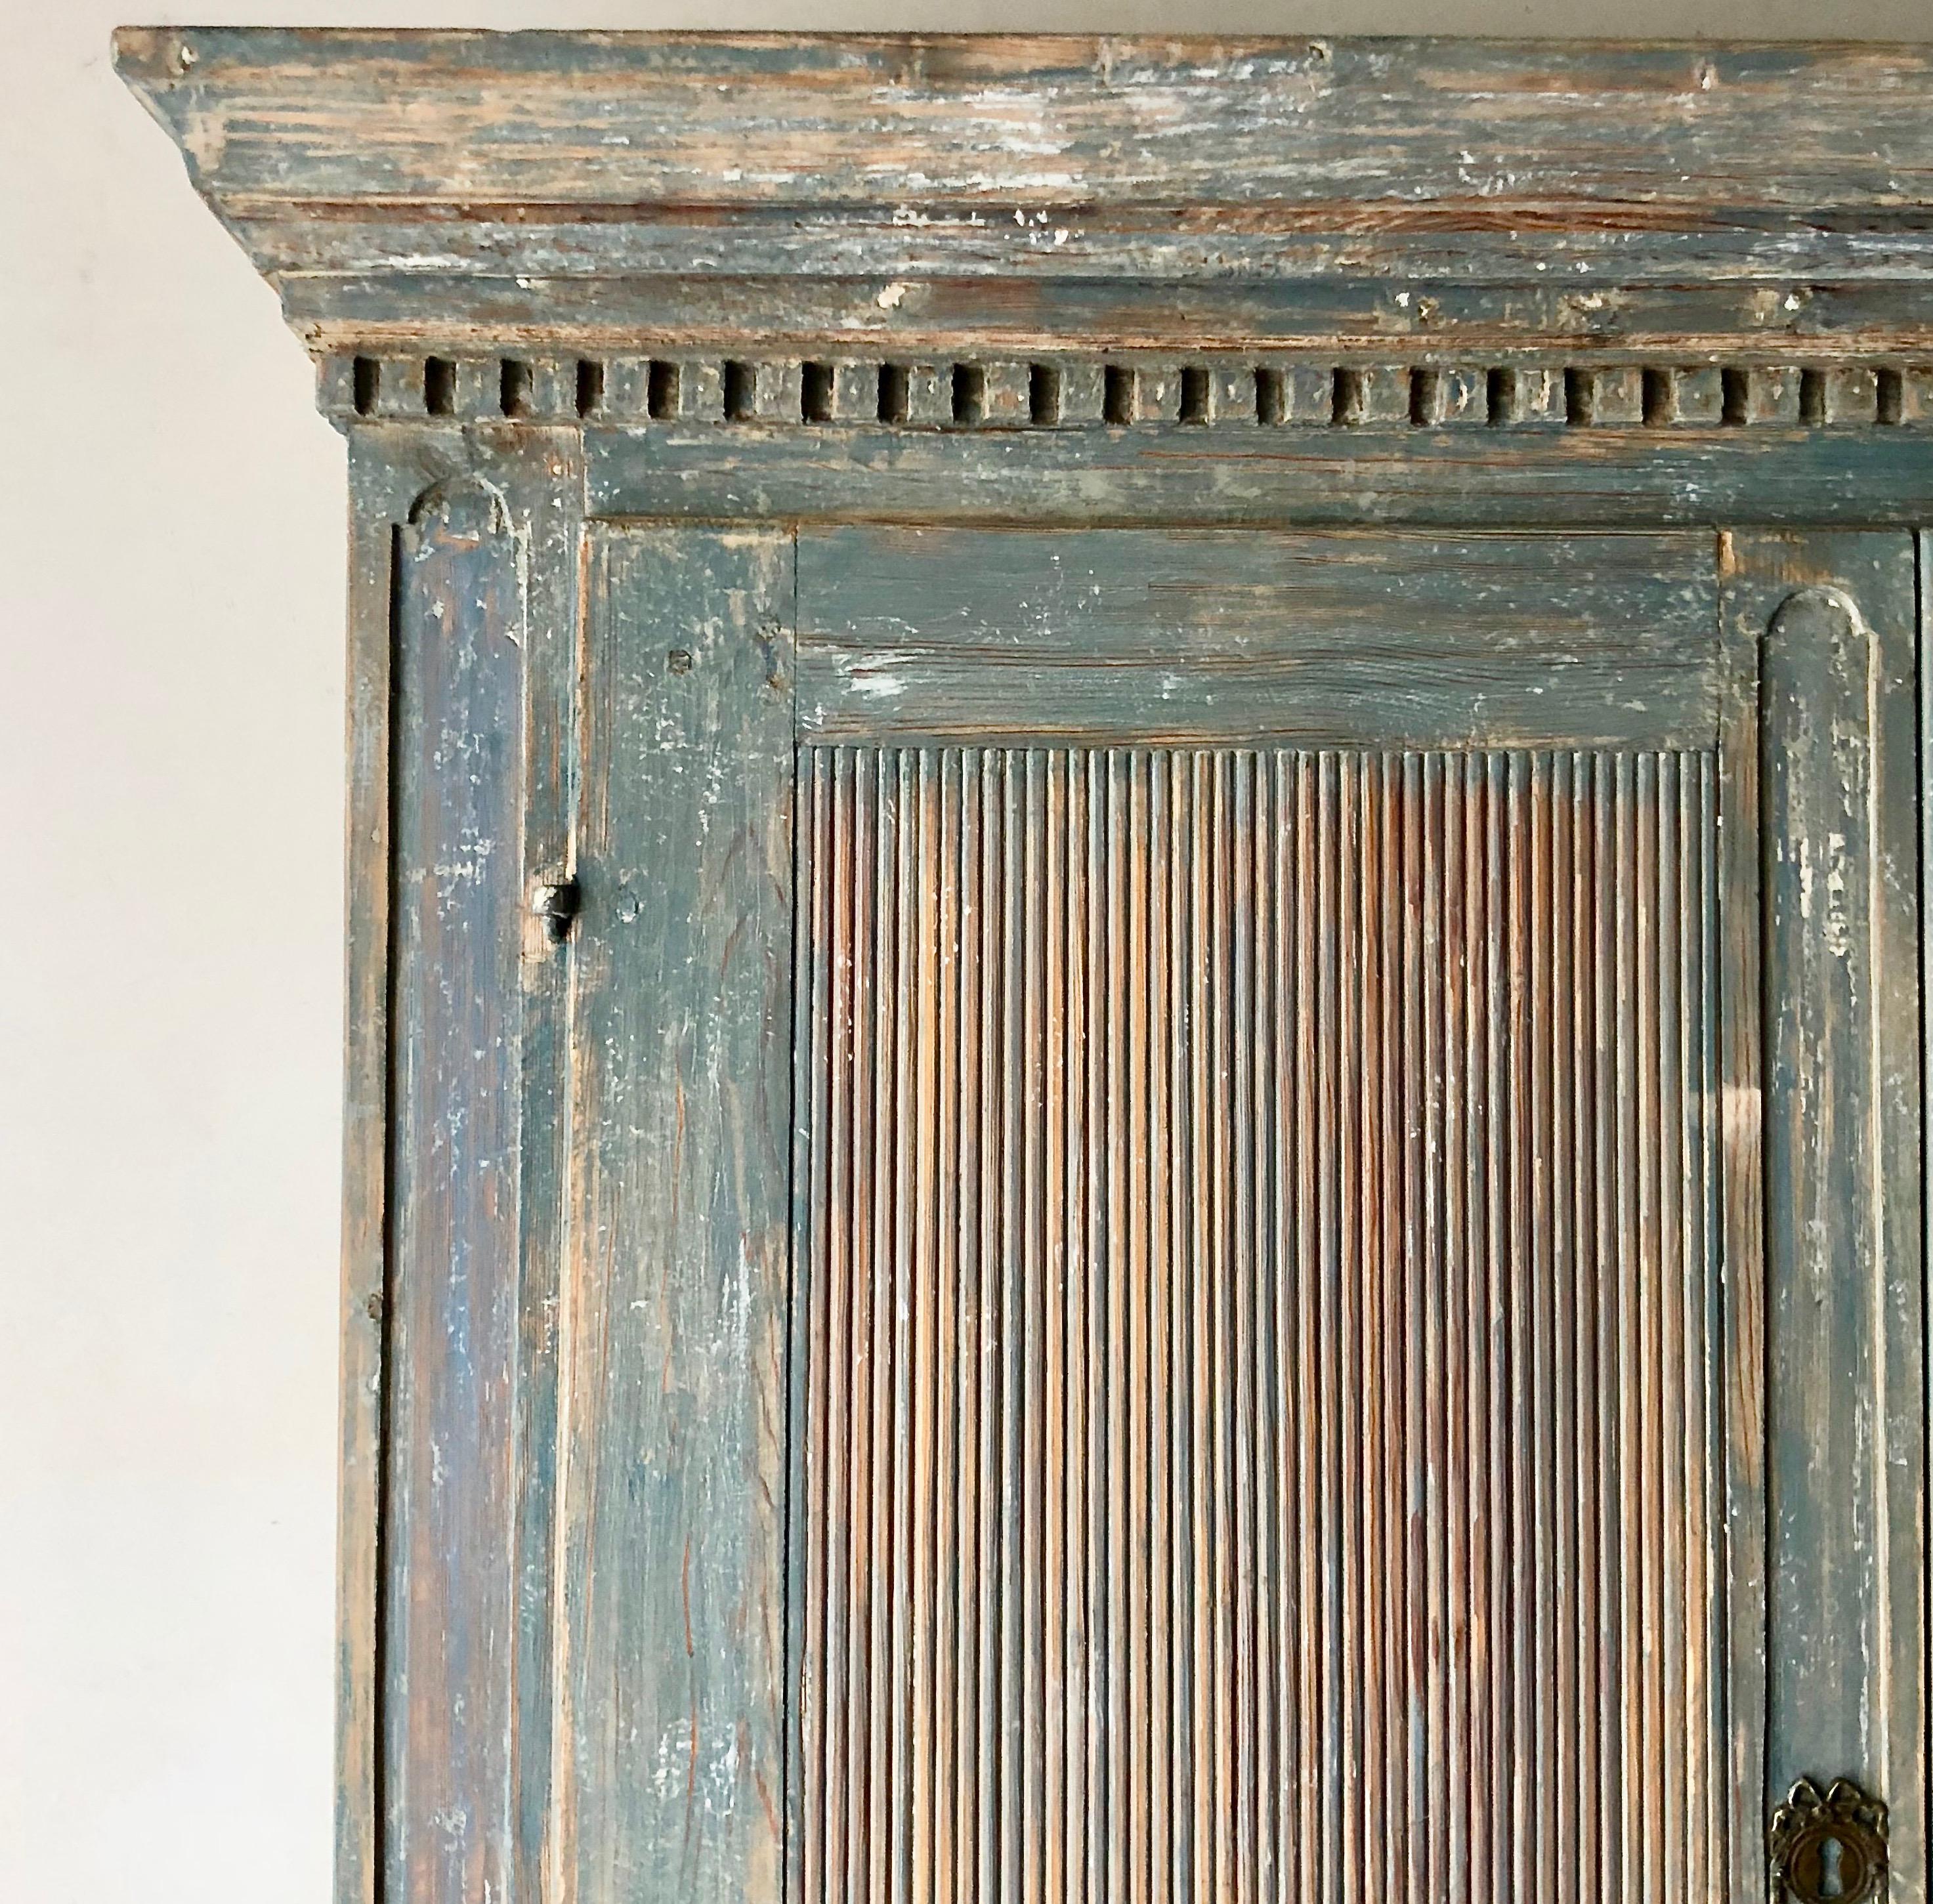 18th century Swedish Gustavian painted cupboard with richly carved, reeded door panels and the simple cornice with dental carvings. Lot of storage with inside selves and small drawers. All in lovely pale blue patina. 
Measurements are with